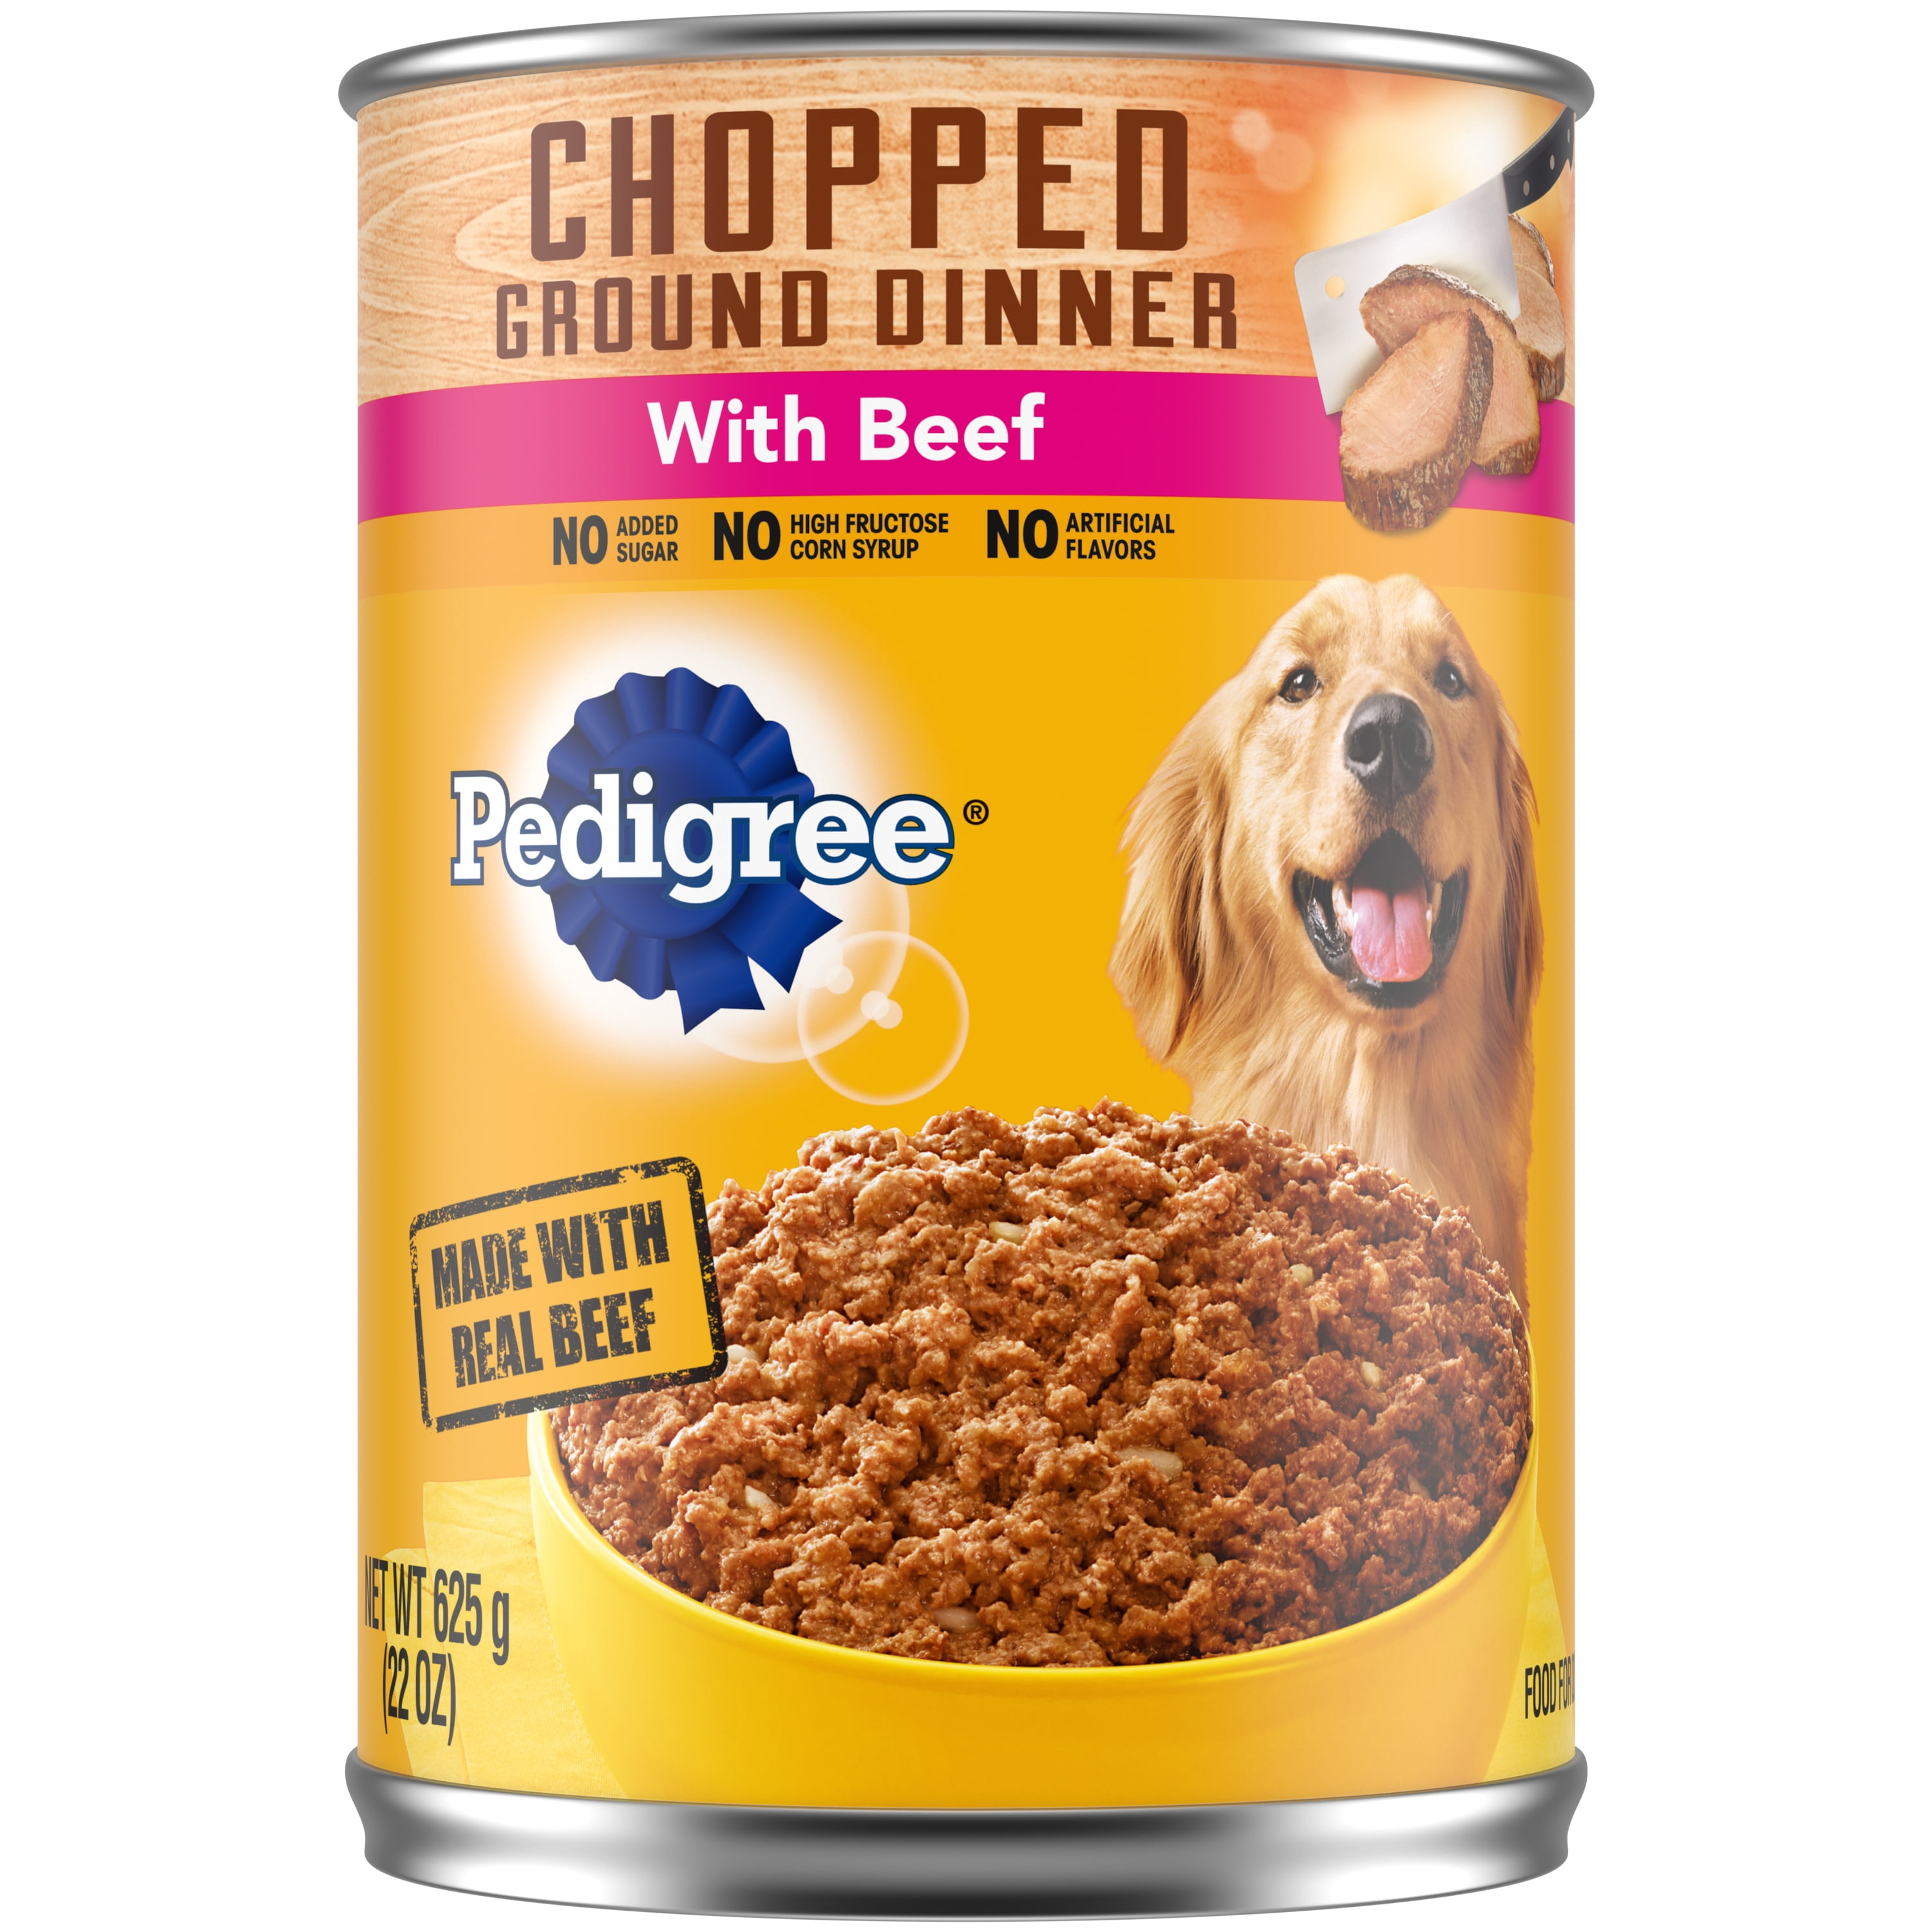 Pedigree Chopped Ground Dinner Beef Flavor Wet Dog Food for Adult Dog, 22 oz. Can